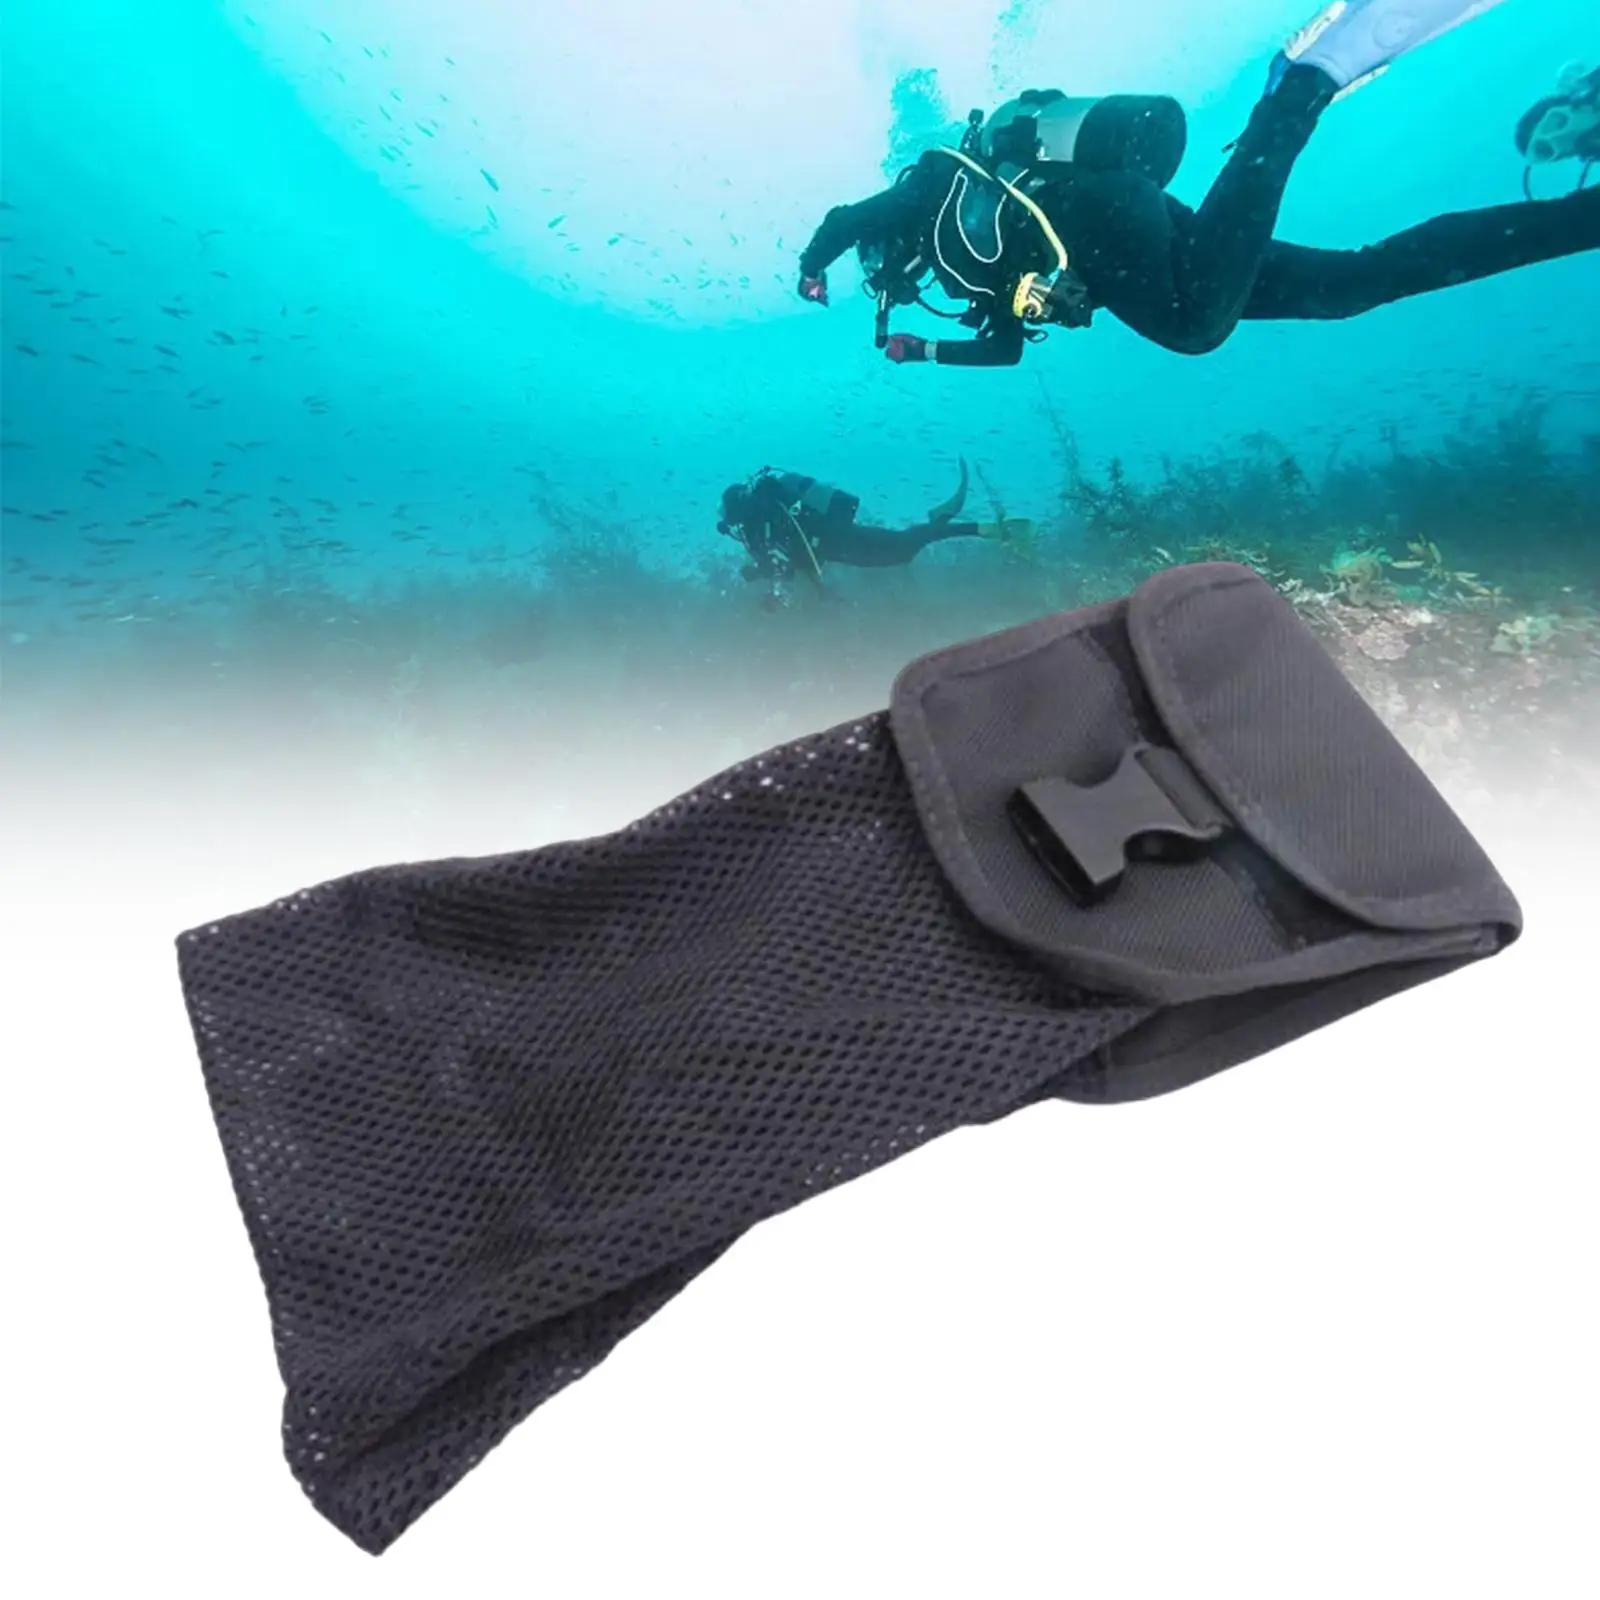 Gear Bag Storage Holder Snorkelling with Bucklet Carry Scuba Diving Mesh Pouch